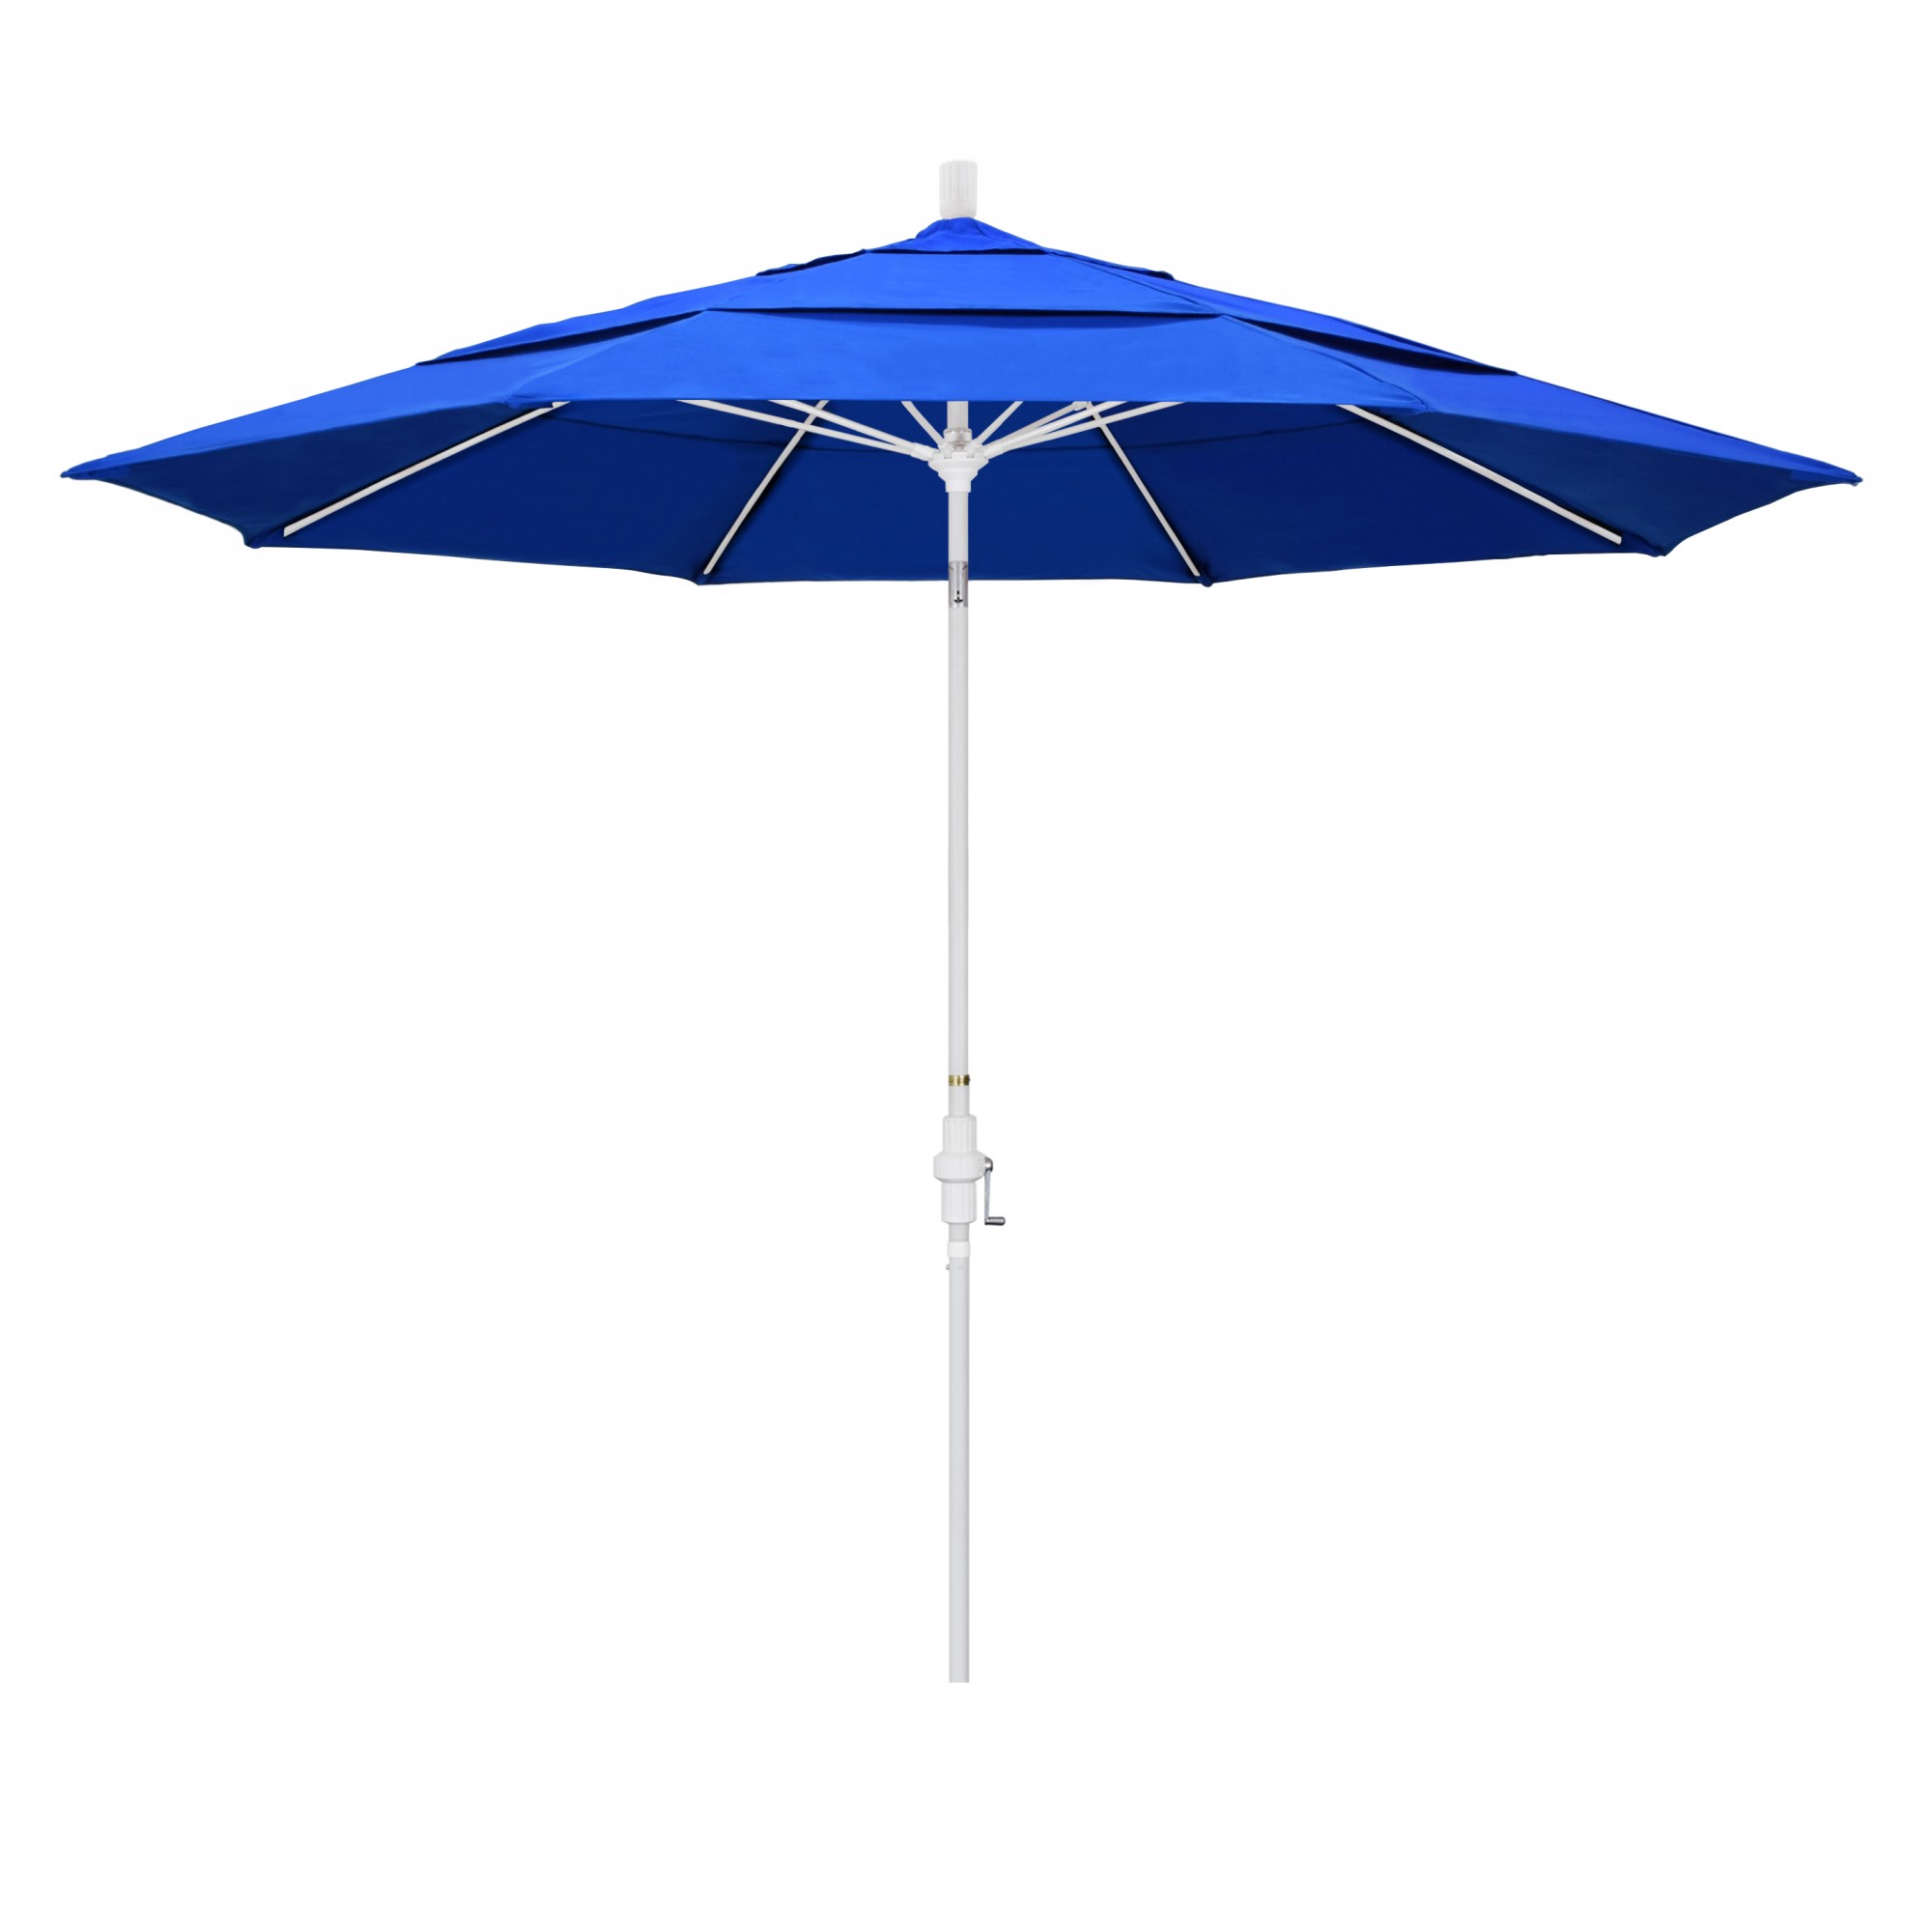 Outdoor Living and Style 11ft Outdoor Sun Master Series Patio Umbrella With Crank Lift and Collar-Tilt System, Pacific Blue